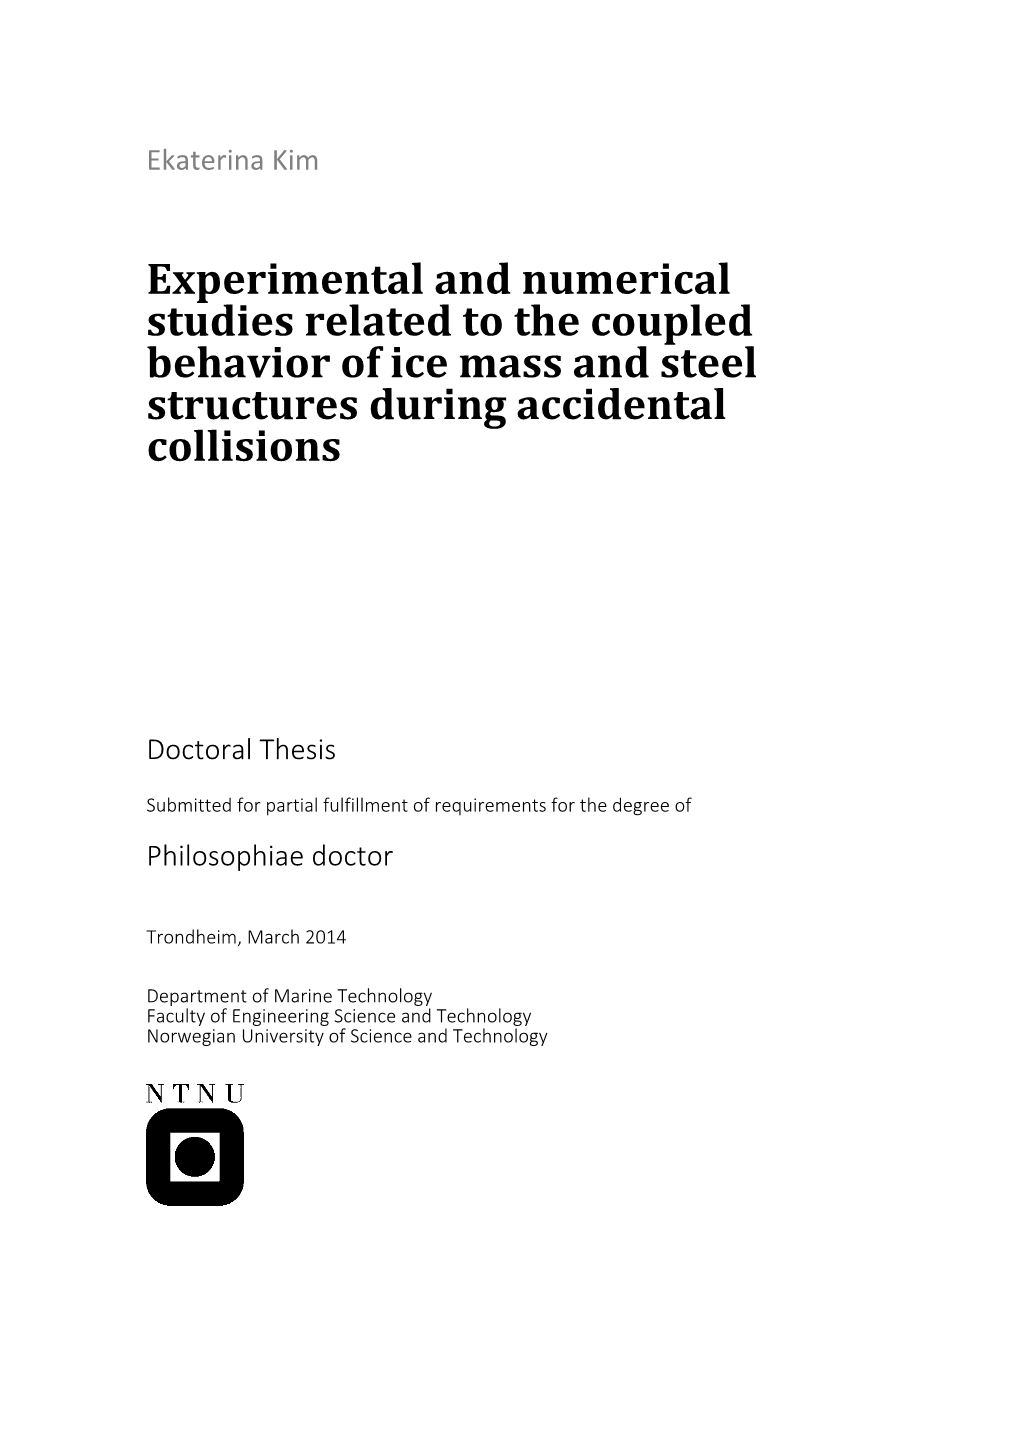 Experimental and Numerical Studies Related to the Coupled Behavior of Ice Mass and Steel Structures During Accidental Collisions